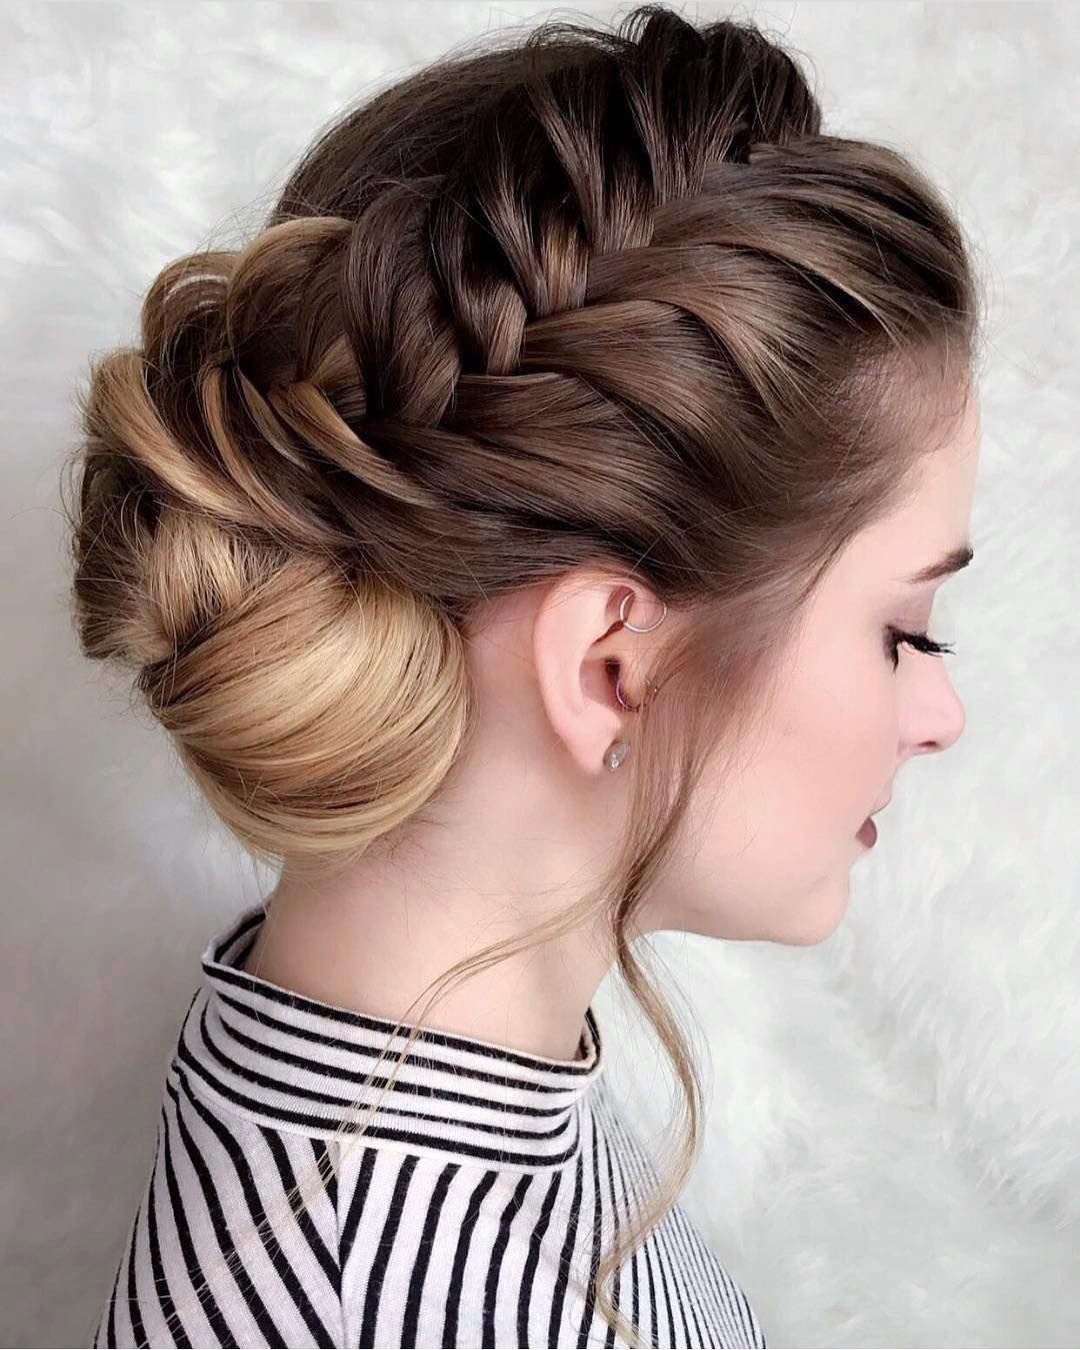 Pretty Prom Hairstyles
 10 New Prom Updo Hair Styles 2020 Gorgeously Creative